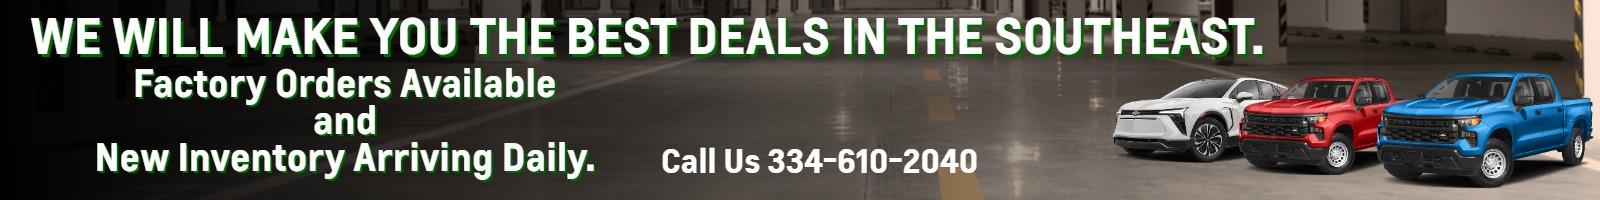 we will make you the best deals in the southeast.
Factory Orders Available and new inventory arriving daily.
Call Us 334-610-2040